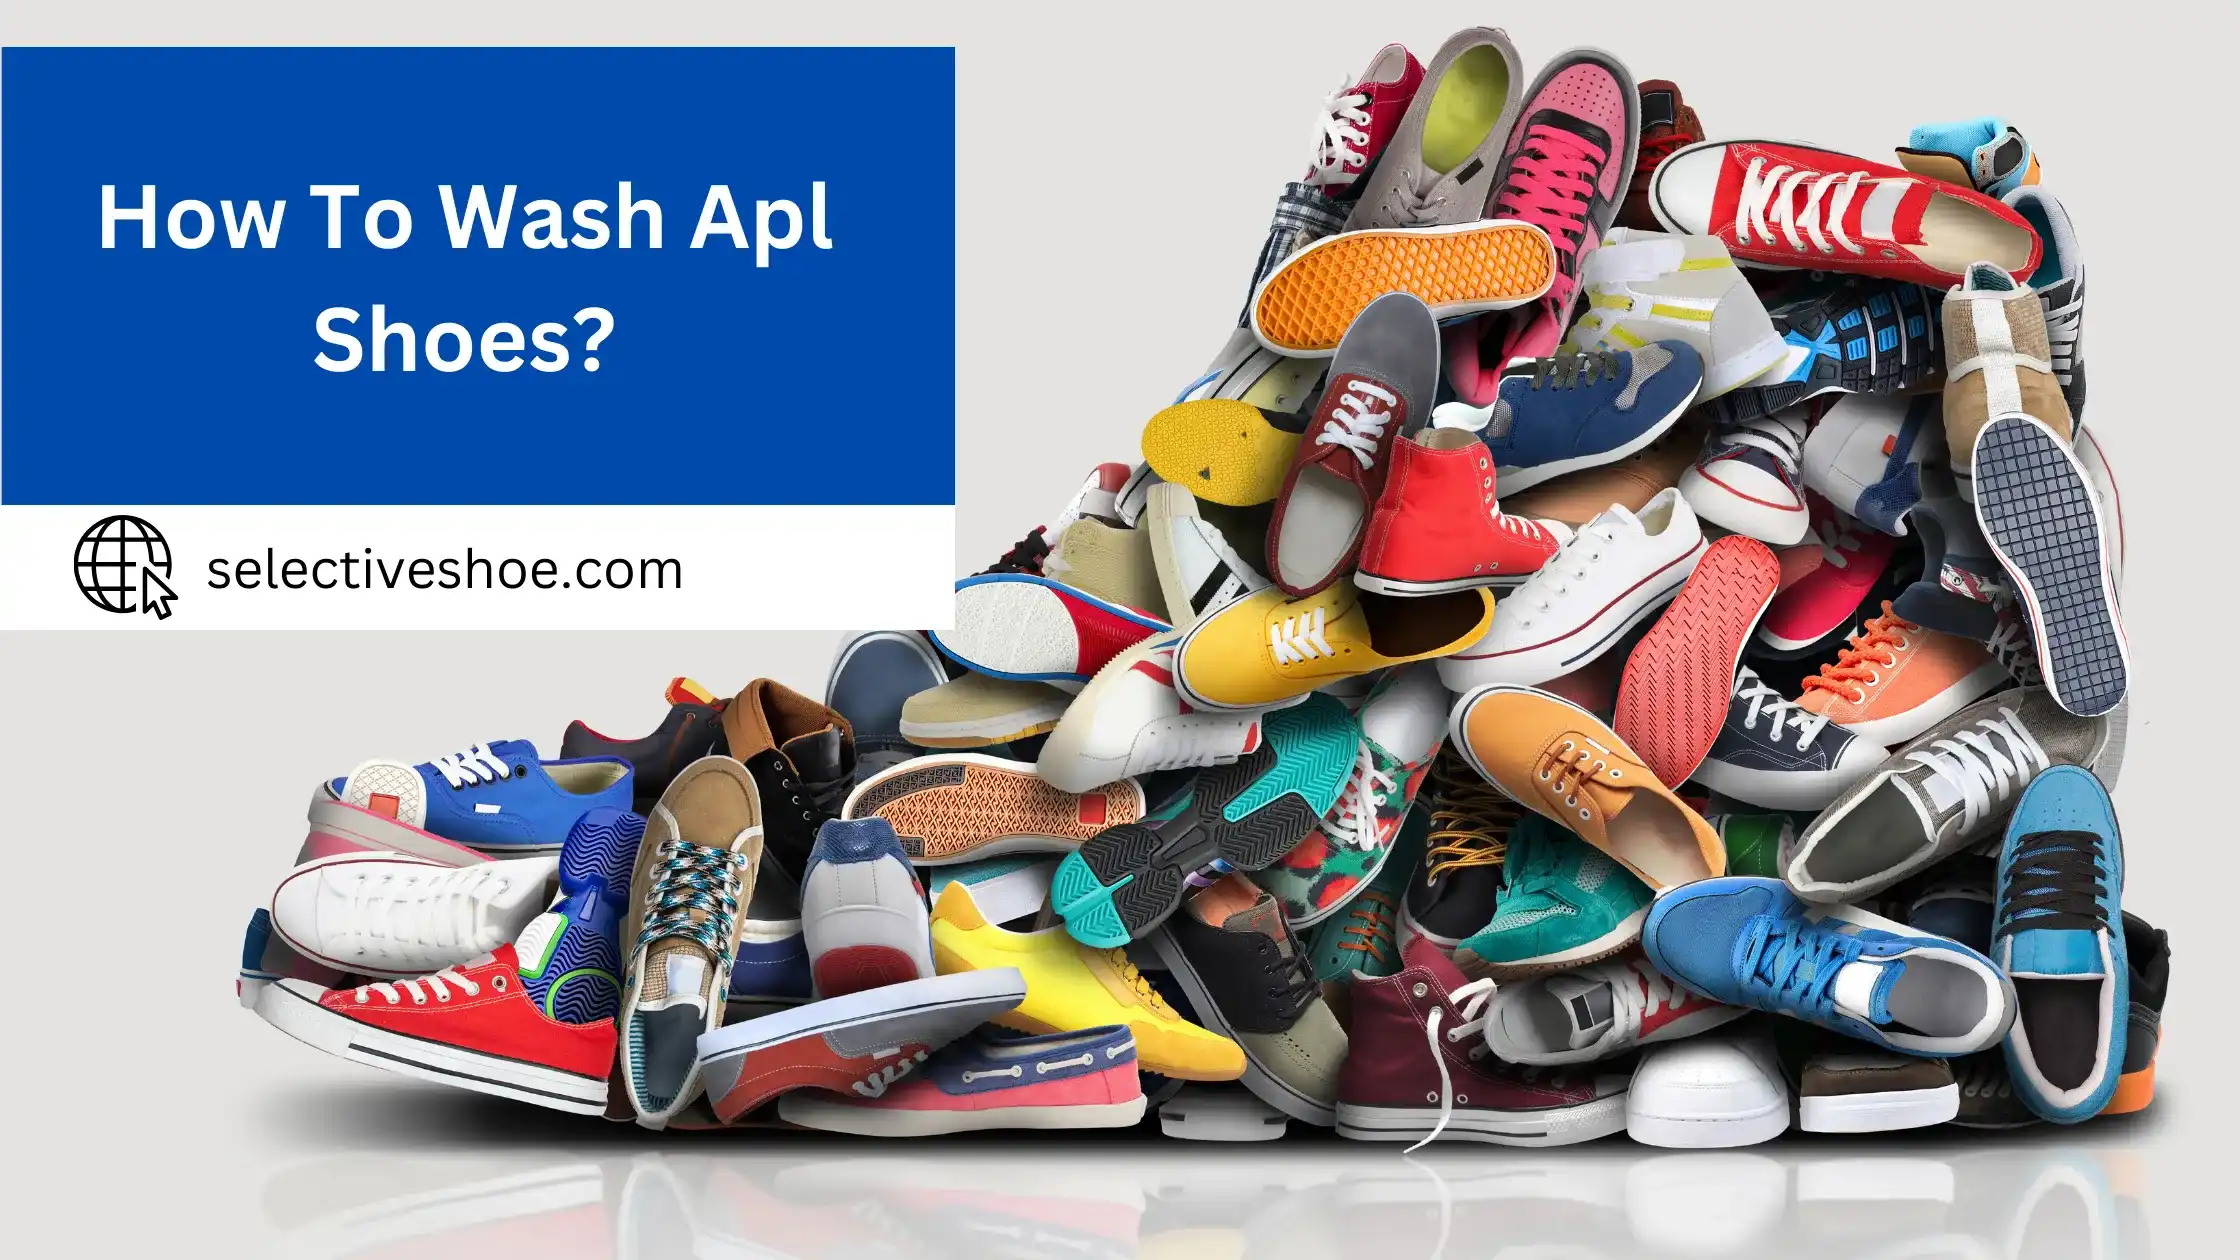 How To Wash Apl Shoes? Cleaning Instructions